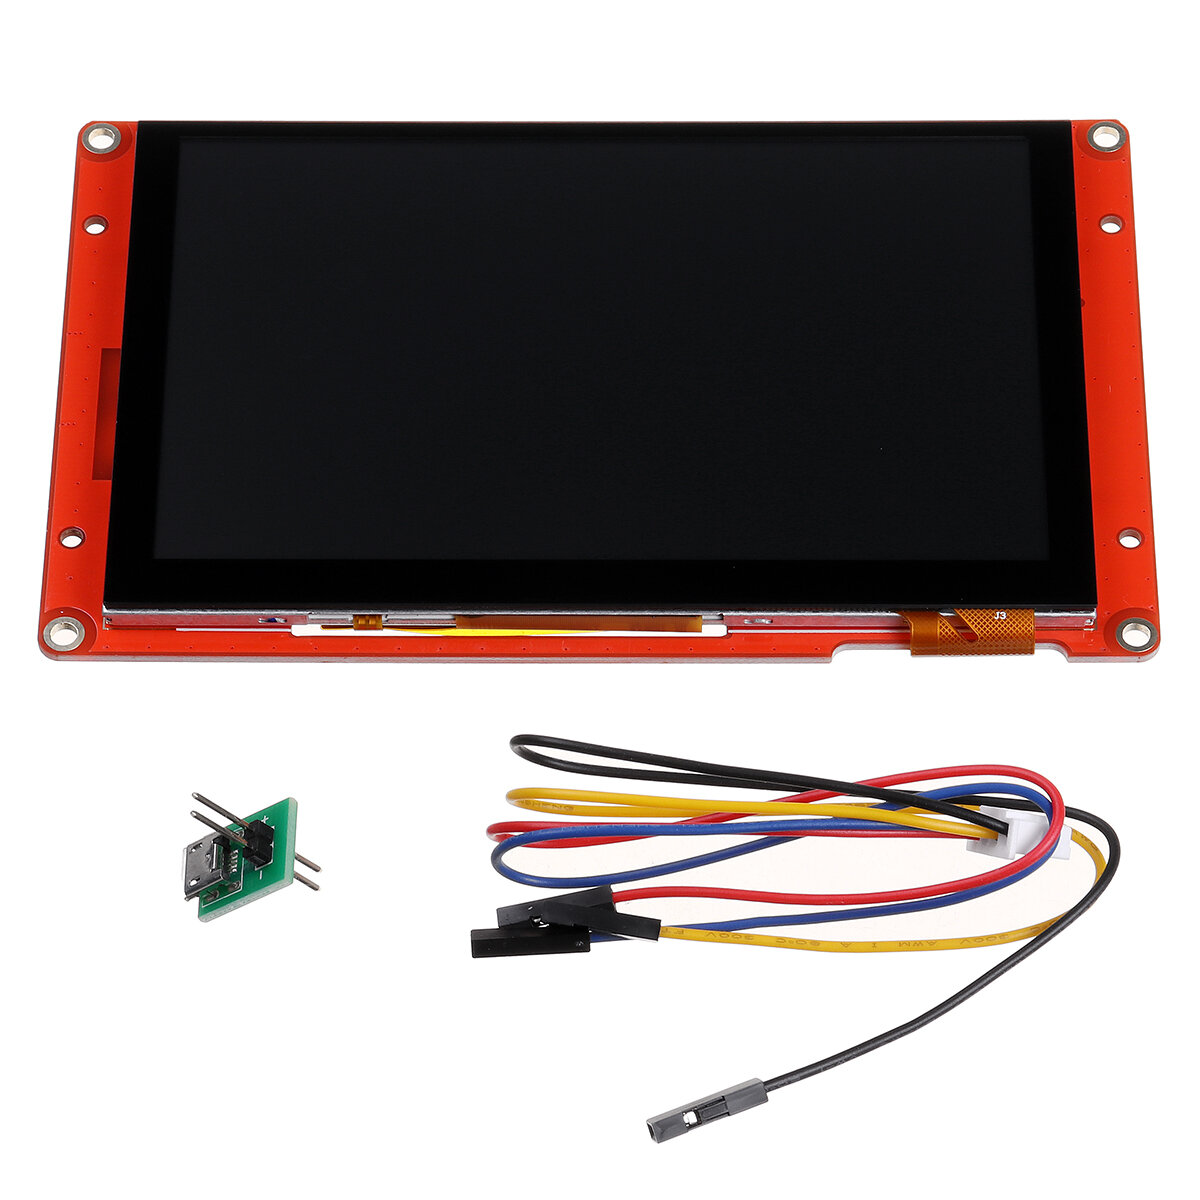 

Nextion Intelligent Series NX8048P050-011C 5.0 Inch Capacitive Touchscreen without Enclosure for HMI GUI Project Develop